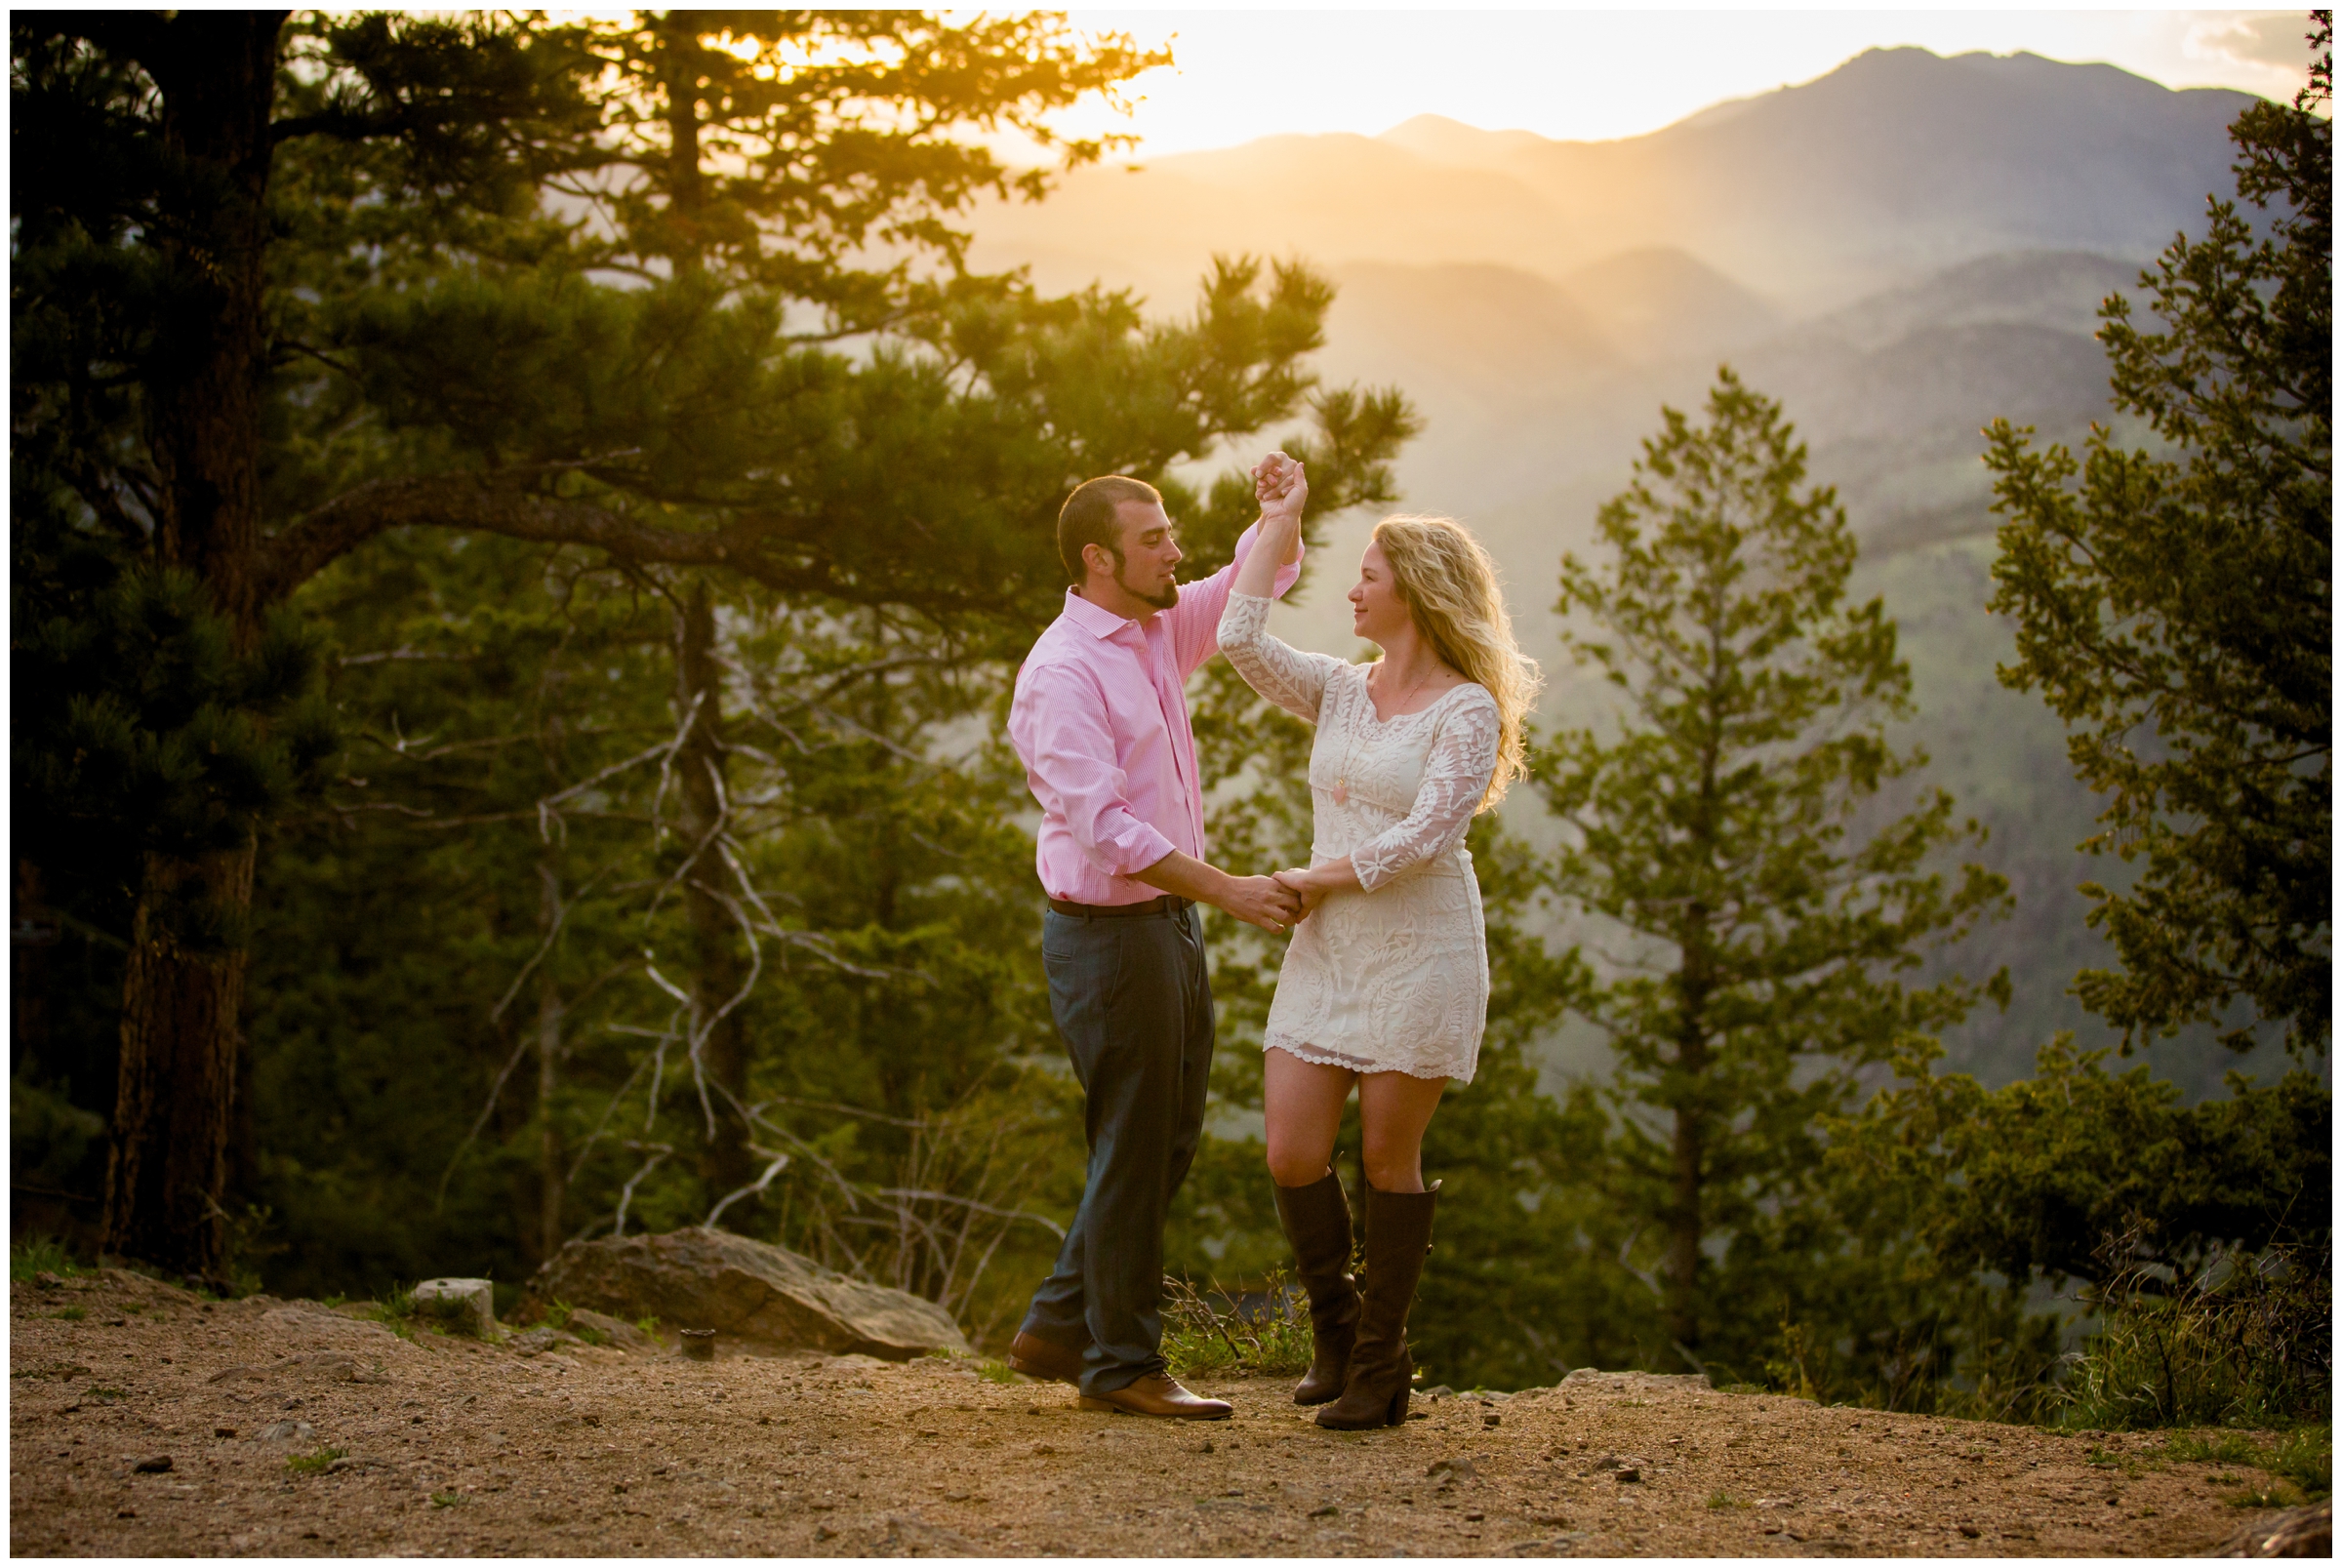 couple dancing with mountains in background during Colorado summer engagement photos by Golden photographer Plum Pretty Photography 